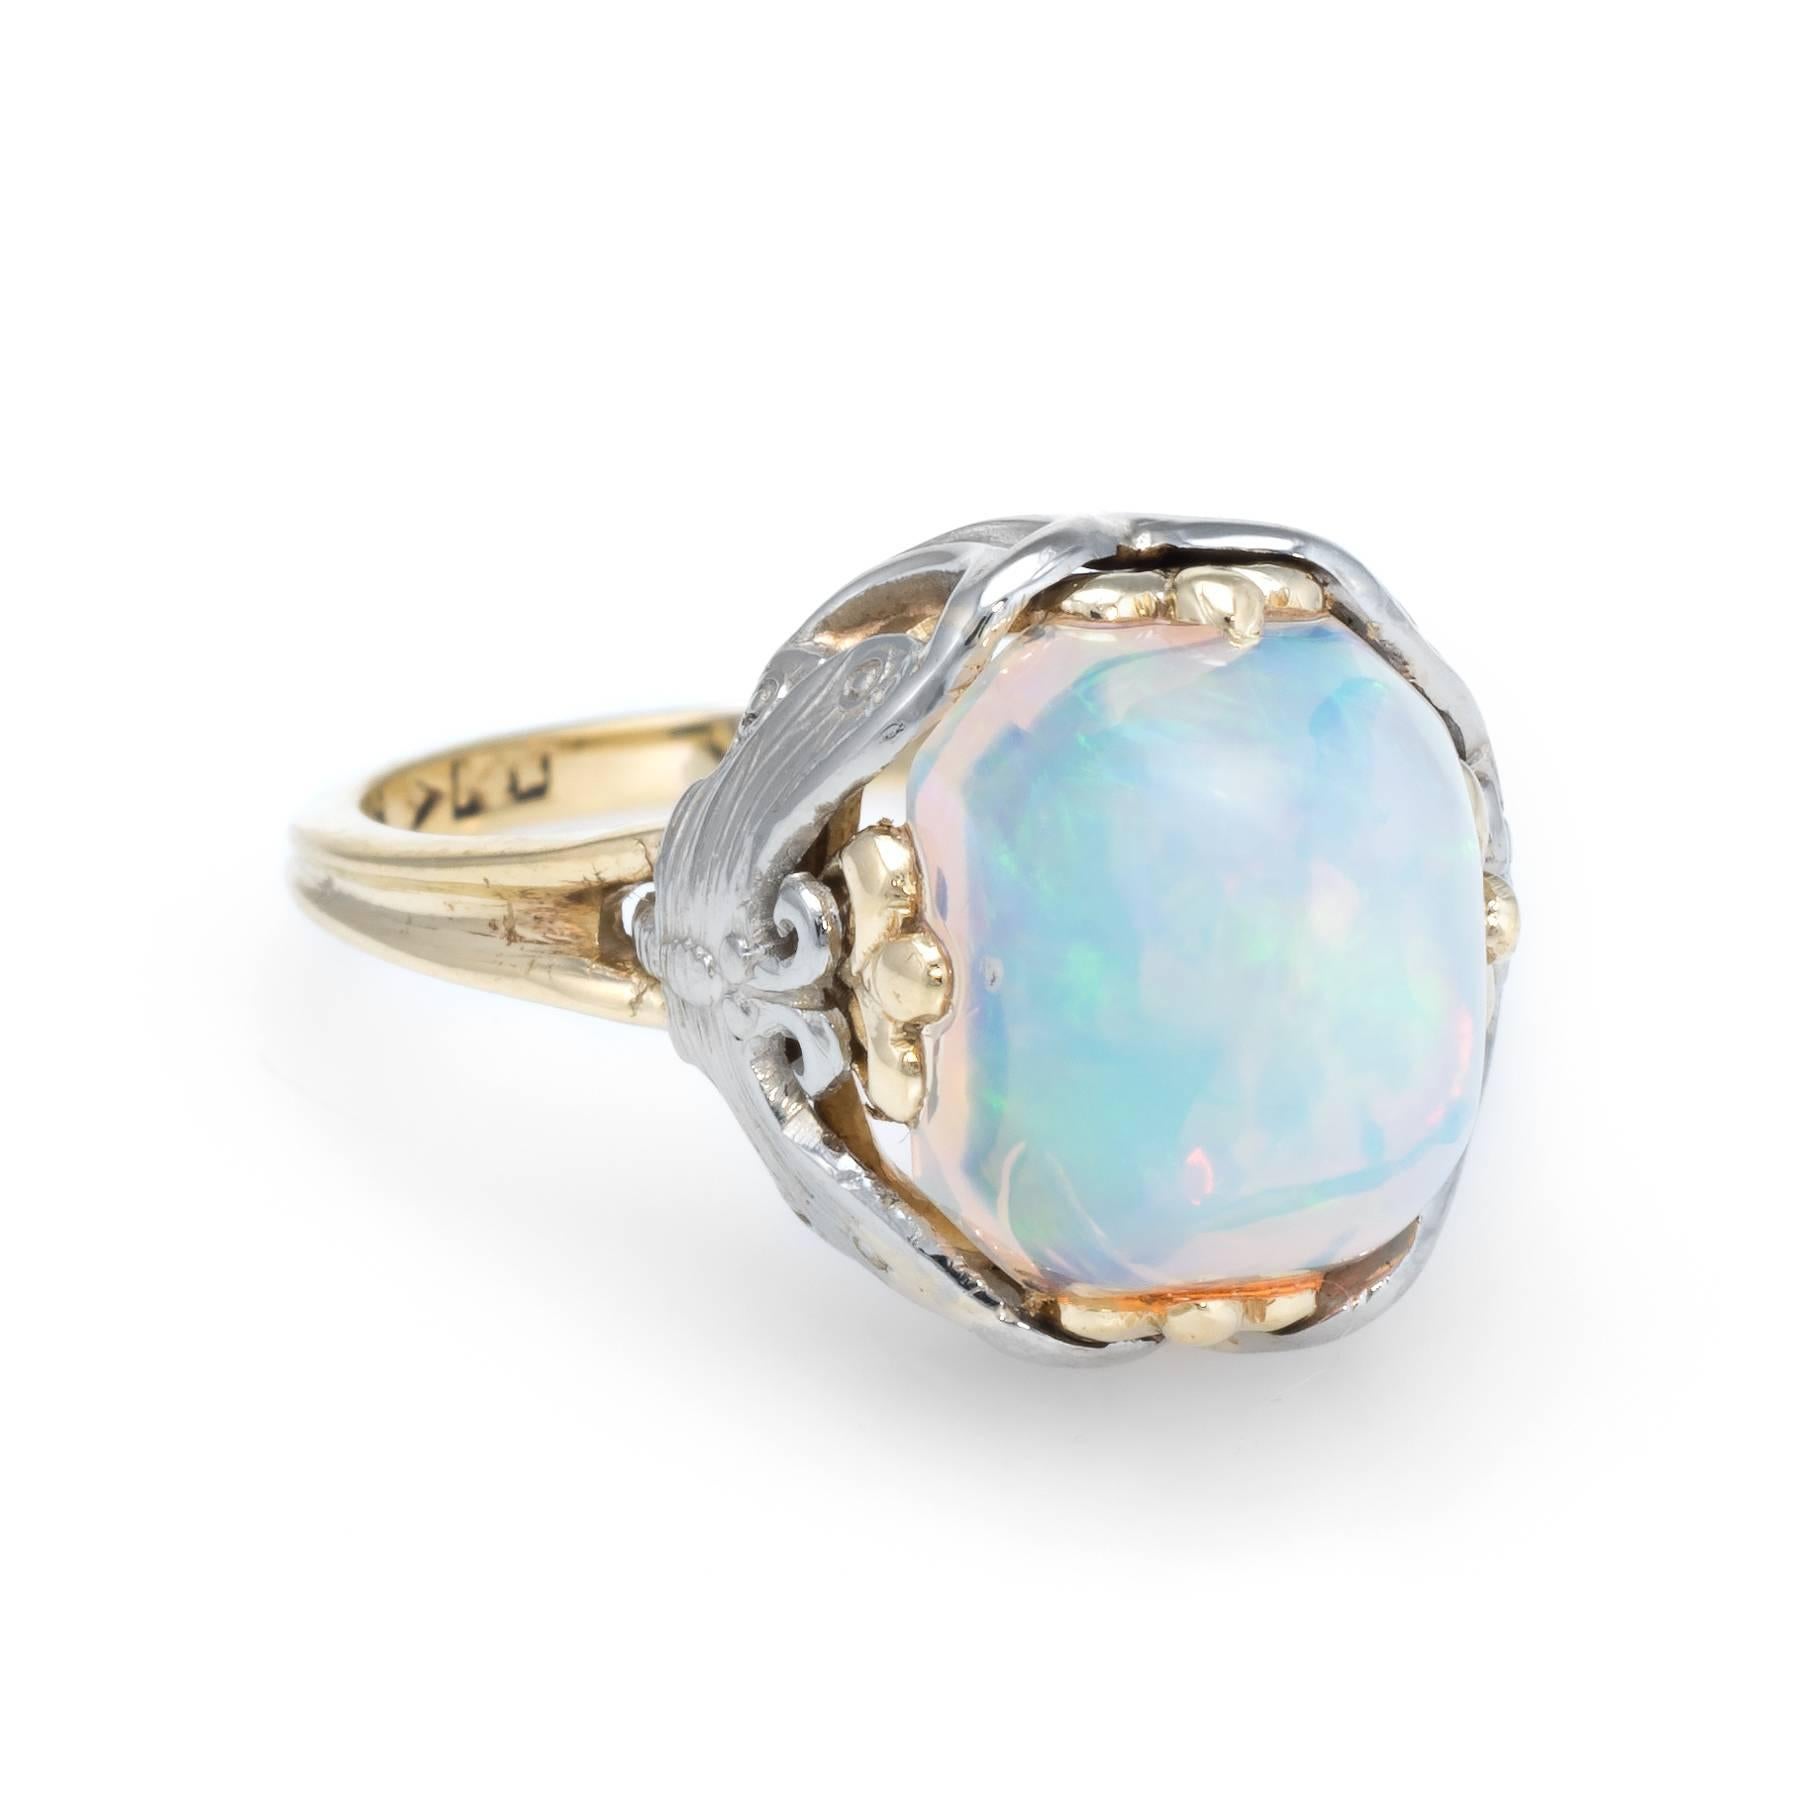 Finely detailed vintage Art Nouveau era ring (circa 1900s to 1910s), crafted in 14 karat yellow & white gold. 

Centrally mounted high dome natural opal measures 9.5mm x 8mm (estimated at 6 carats). The opal is in excellent condition and free of